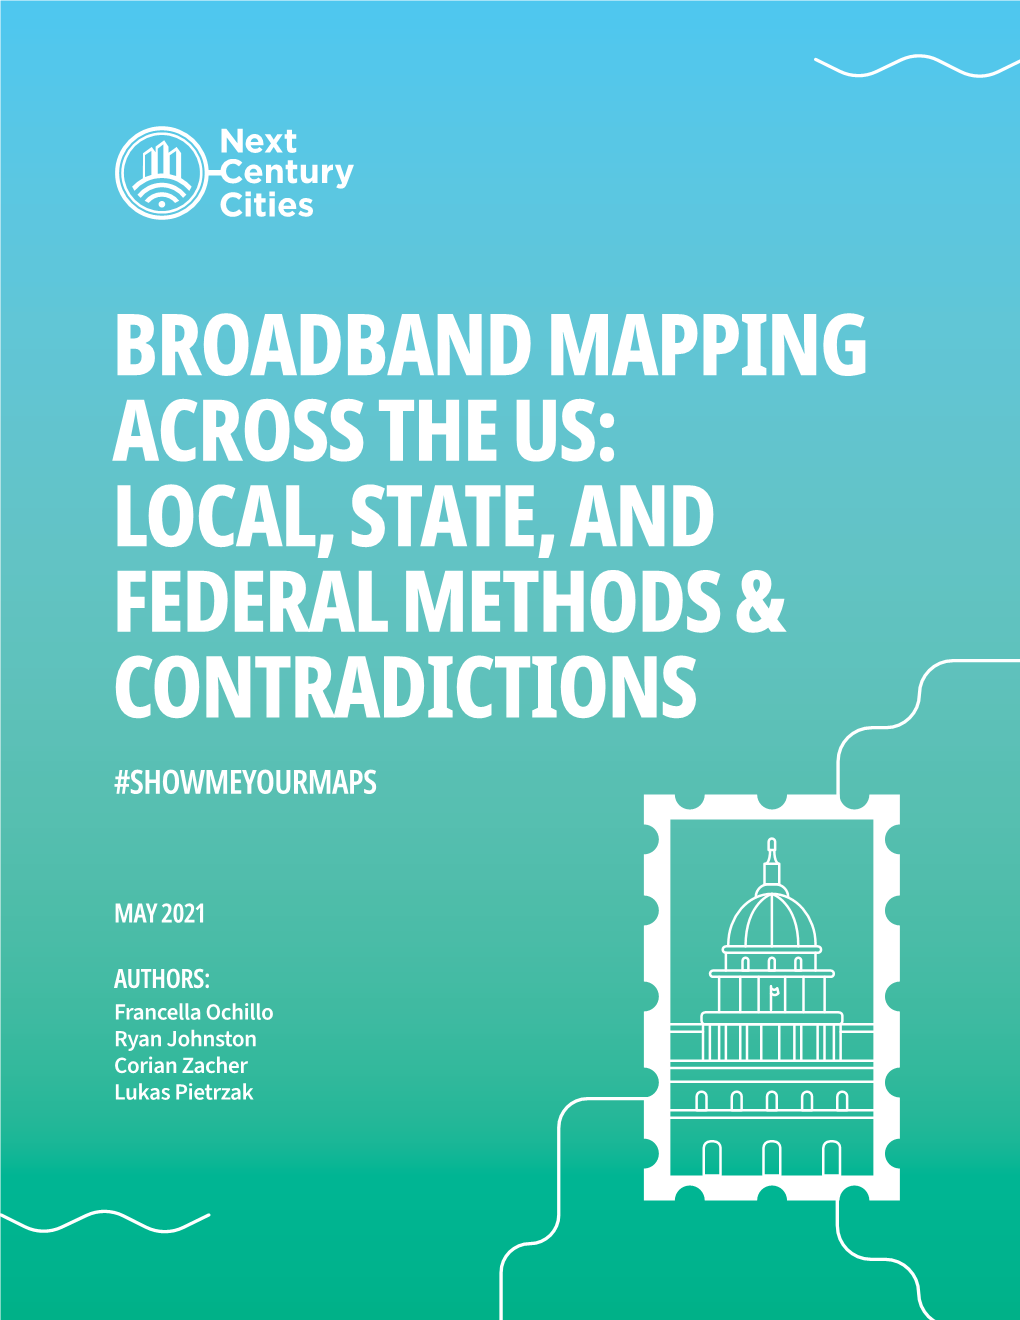 Broadband Mapping Across the Us: Local, State, and Federal Methods & Contradictions #Showmeyourmaps